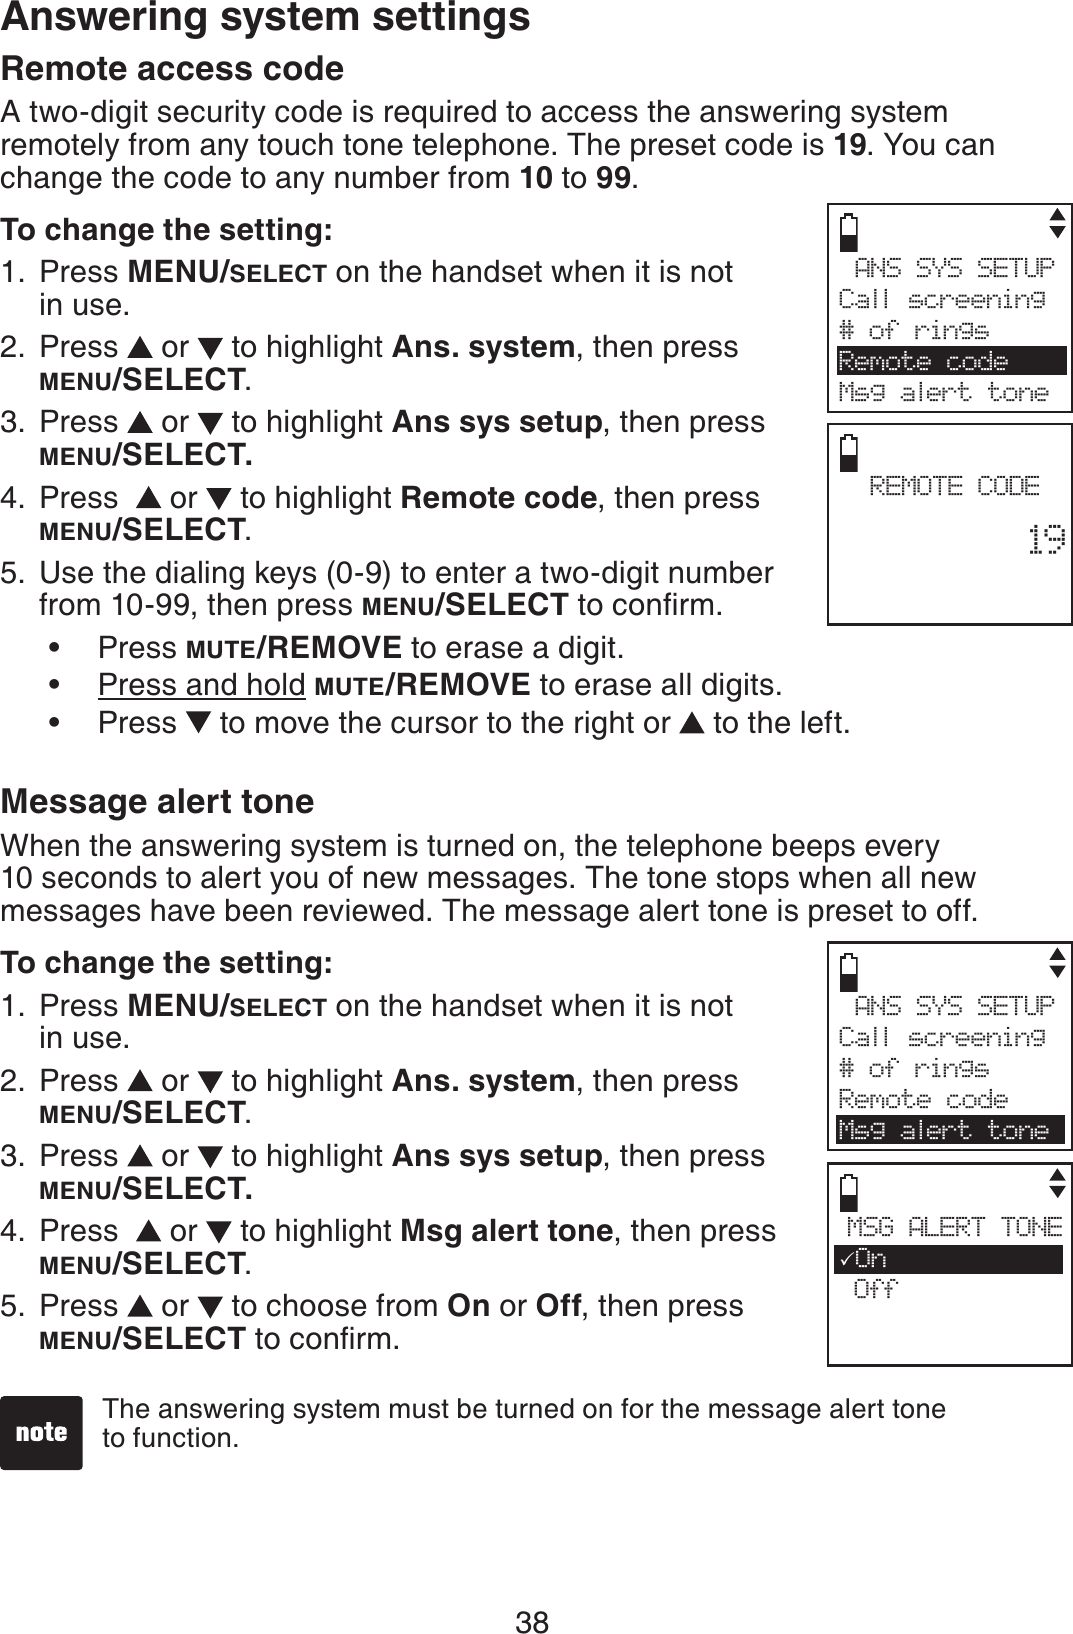 38Answering system settingsRemote access code A two-digit security code is required to access the answering system remotely from any touch tone telephone. The preset code is 19. You can change the code to any number from 10 to 99.To change the setting:Press MENU/SELECT on the handset when it is not in use.Press   or   to highlight Ans. system, then press MENU/SELECT.Press   or   to highlight Ans sys setup, then press MENU/SELECT.Press    or   to highlight Remote code, then press MENU/SELECT.Use the dialing keys (0-9) to enter a two-digit number from 10-99, then press MENU/SELECT VQEQPſTO.Press MUTE/REMOVE to erase a digit.Press and hold MUTE/REMOVE to erase all digits.Press   to move the cursor to the right or  to the left.Message alert toneWhen the answering system is turned on, the telephone beeps every 10 seconds to alert you of new messages. The tone stops when all new messages have been reviewed. The message alert tone is preset to off.To change the setting:Press MENU/SELECT on the handset when it is not in use.Press   or   to highlight Ans. system, then press MENU/SELECT.Press   or   to highlight Ans sys setup, then press MENU/SELECT.Press    or   to highlight Msg alert tone, then press MENU/SELECT.Press  or  to choose from On or Off, then press MENU/SELECT VQEQPſTO.1.2.3.4.5.•••1.2.3.4.5.The answering system must be turned on for the message alert tone to function. ANS SYS SETUPCall screening# of ringsRemote codeMsg alert toneREMOTE CODE        19ANS SYS SETUPCall screening# of ringsRemote codeMsg alert toneMSG ALERT TONE3On Off